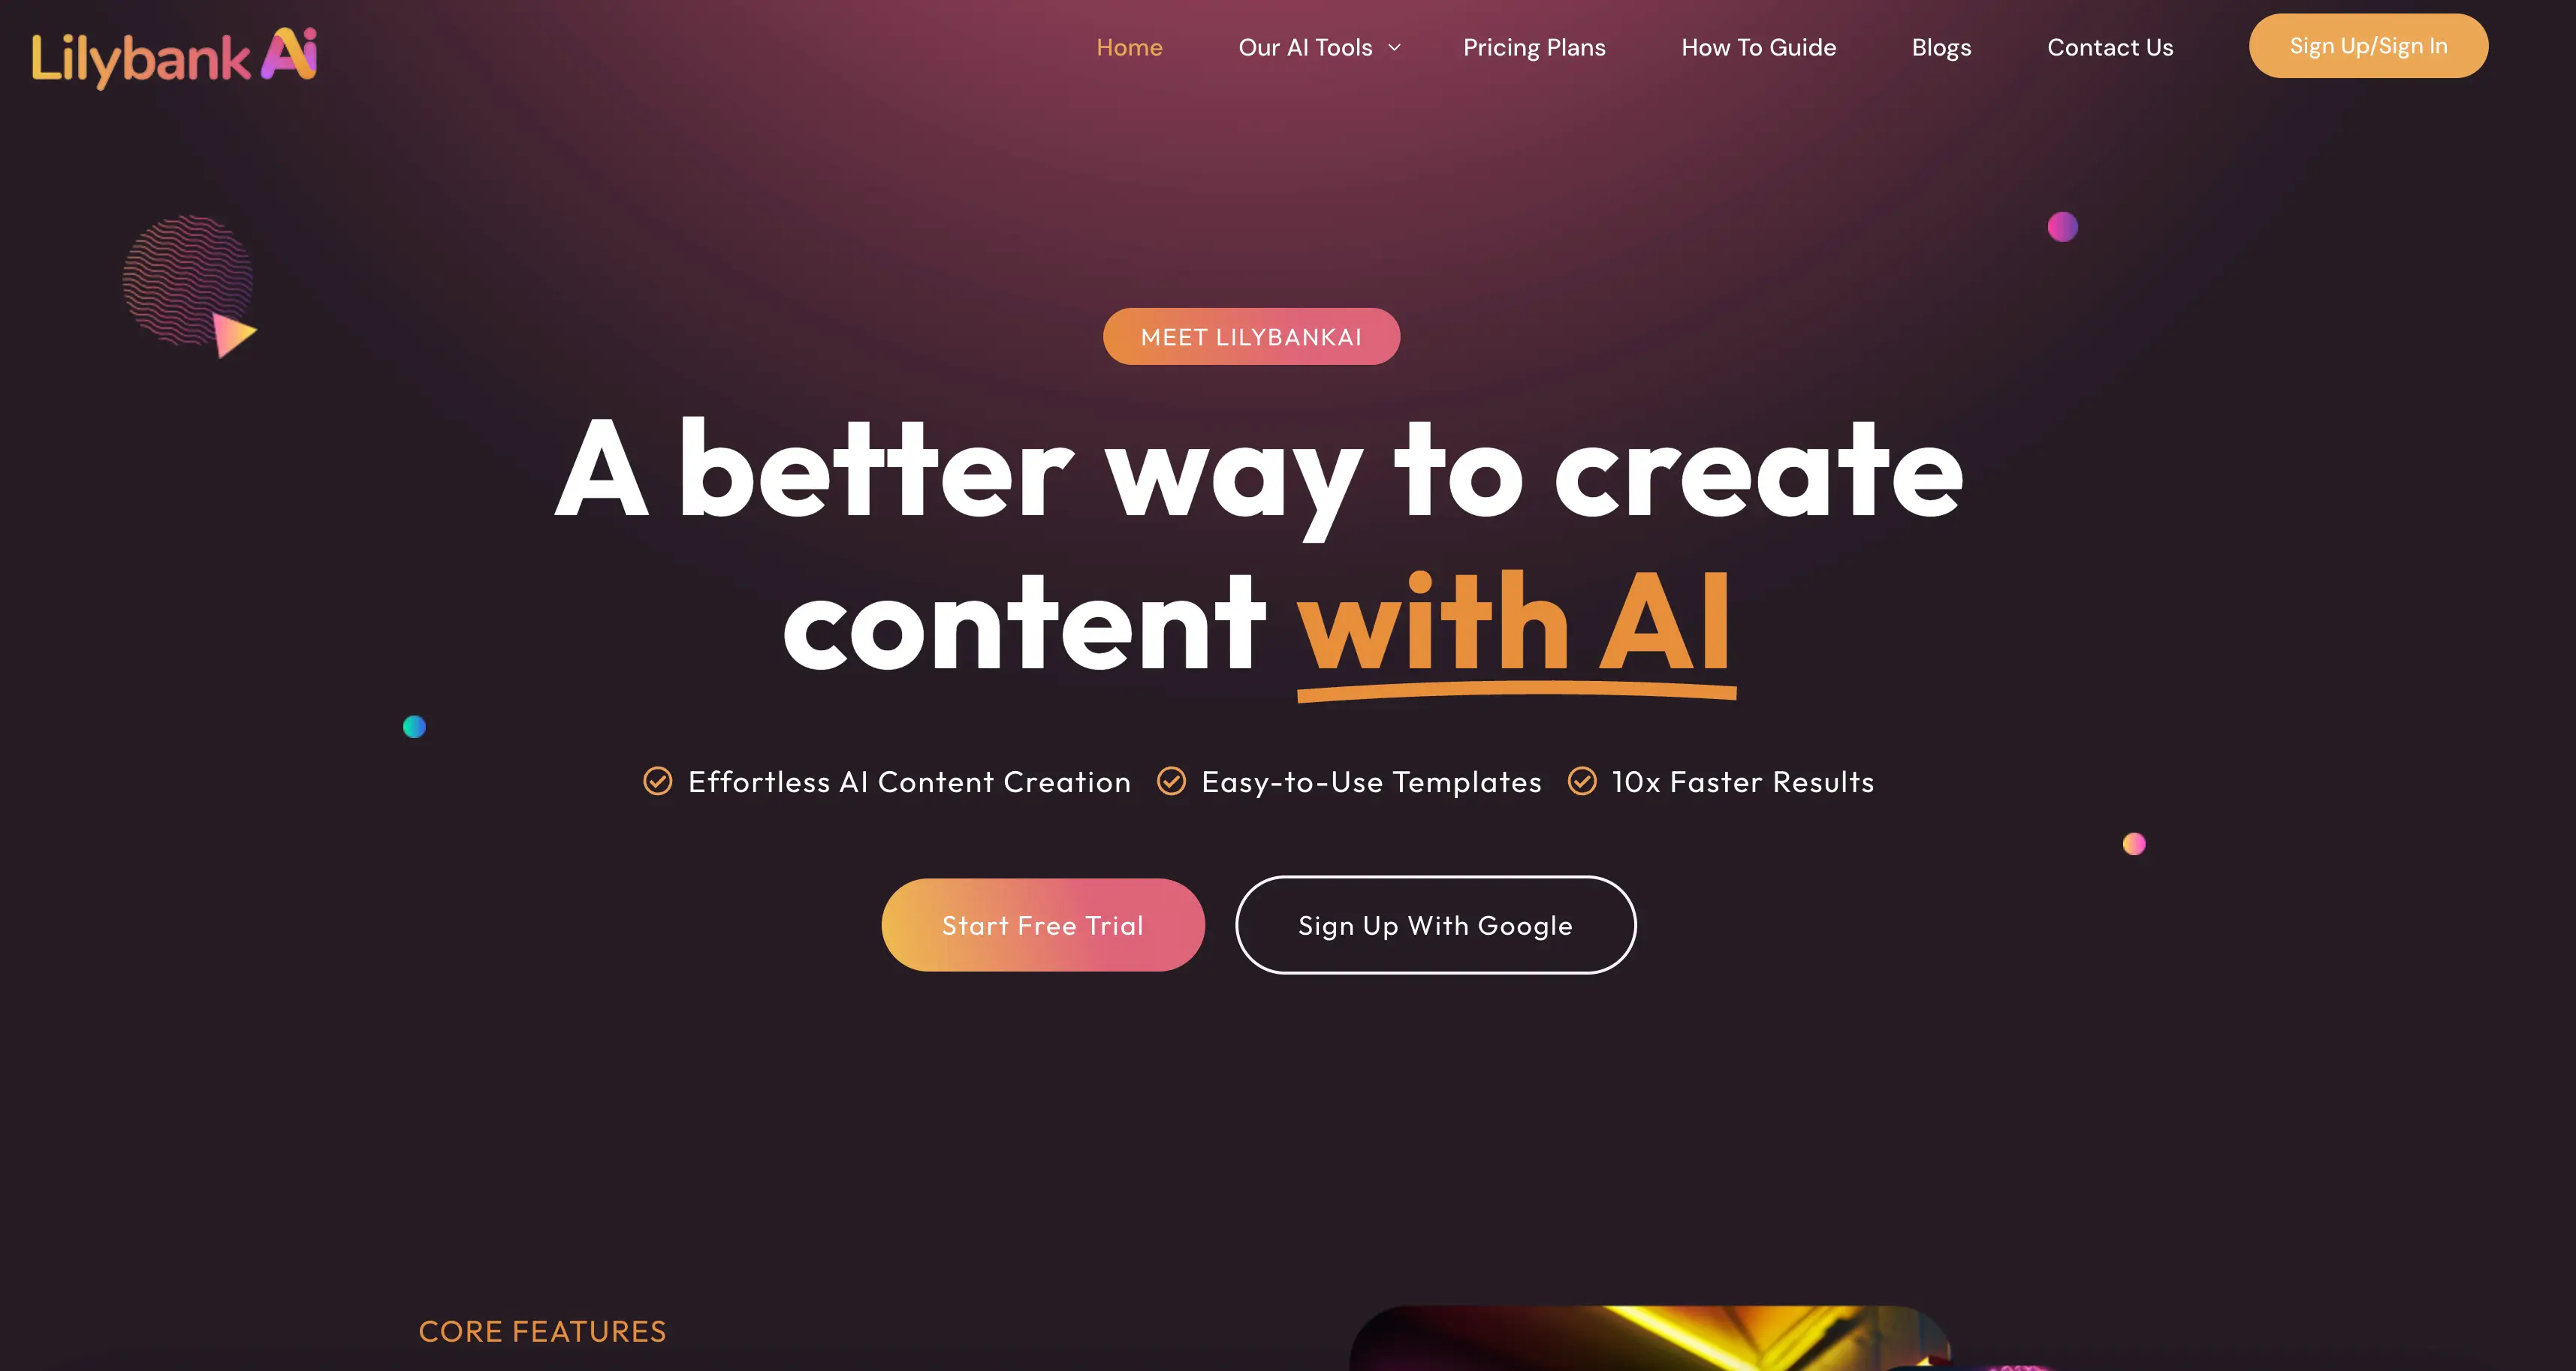 A better way to create content with AI